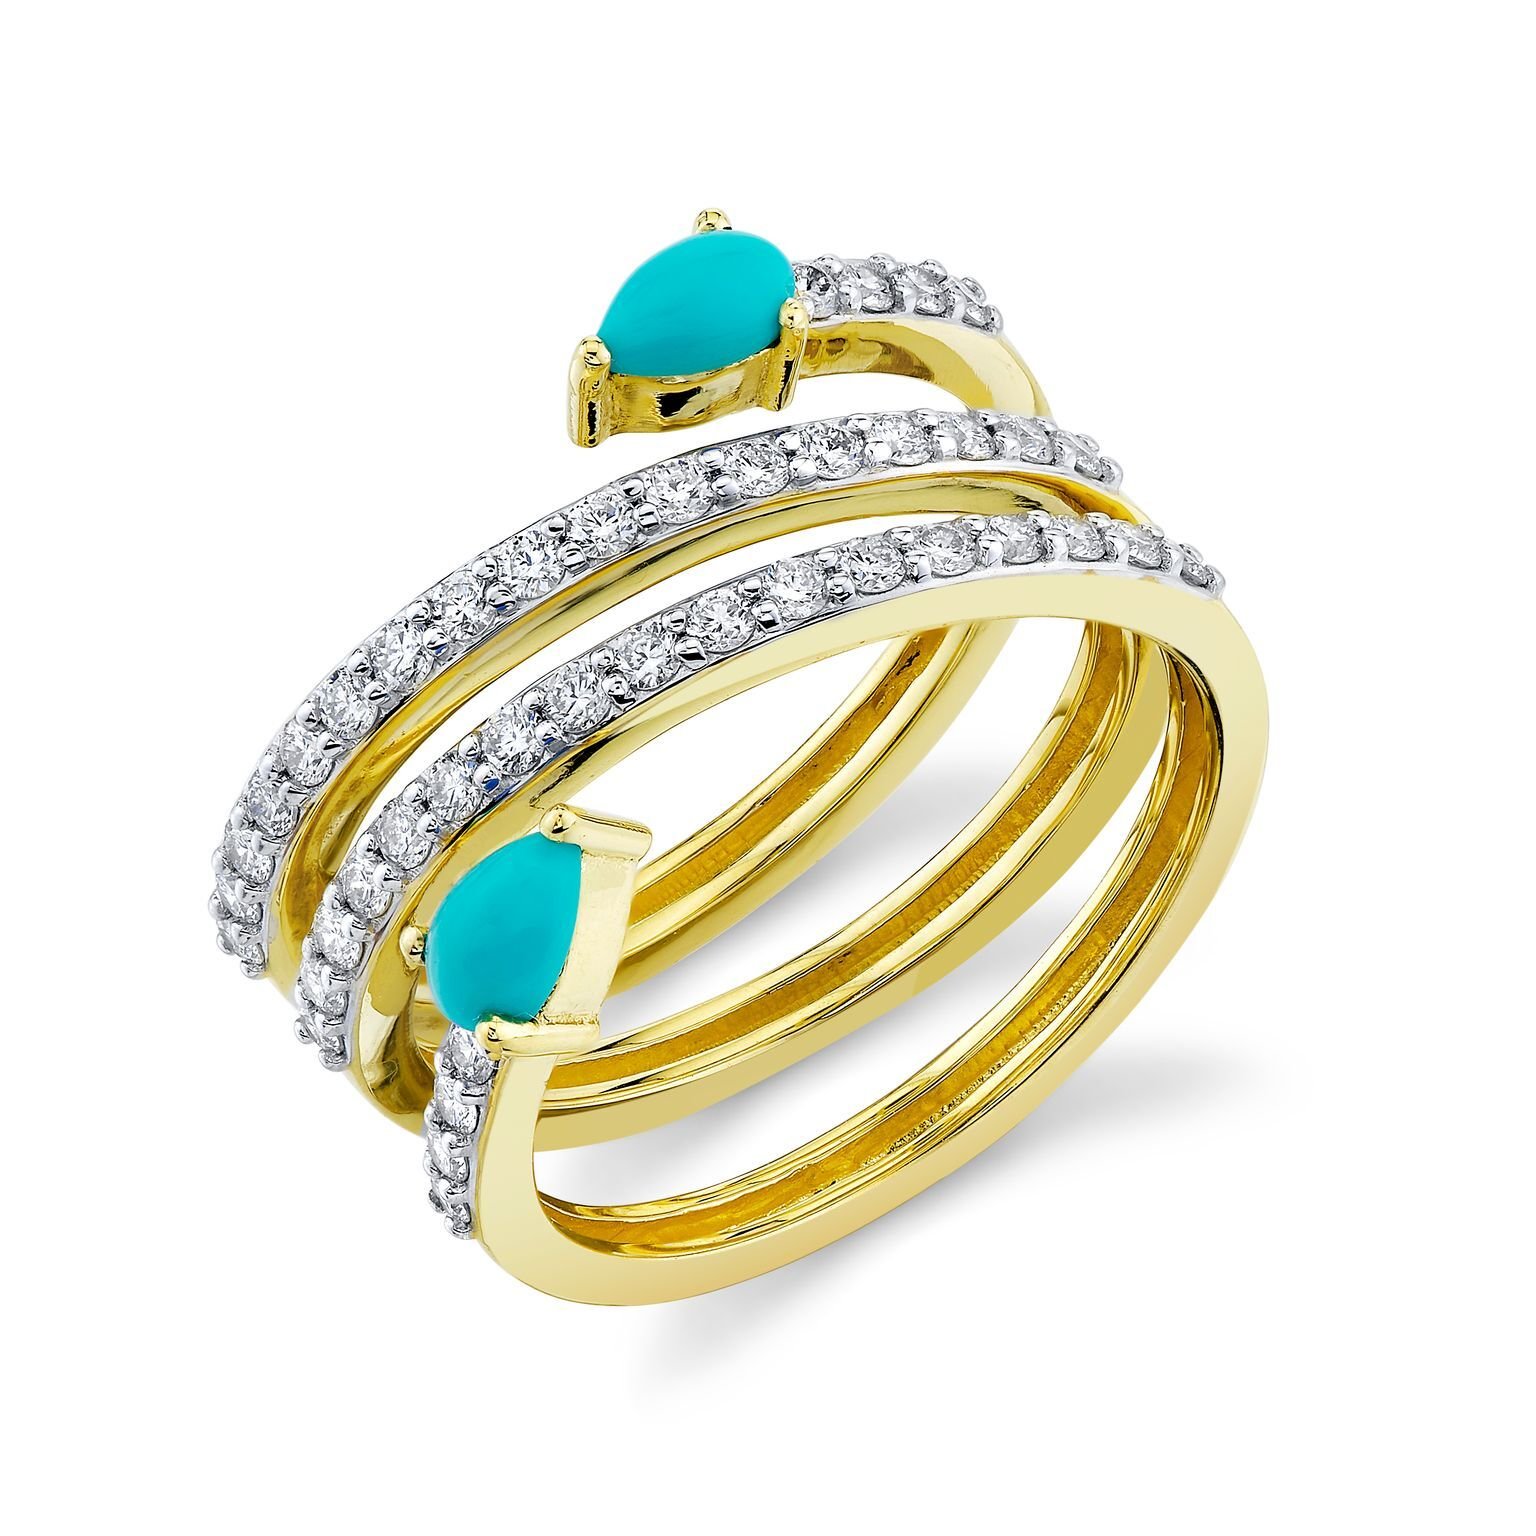 DIAMOND CRISS-CROSS BAND WITH PEAR SHAPED TURQUOISE WITH STRIE DETAIL